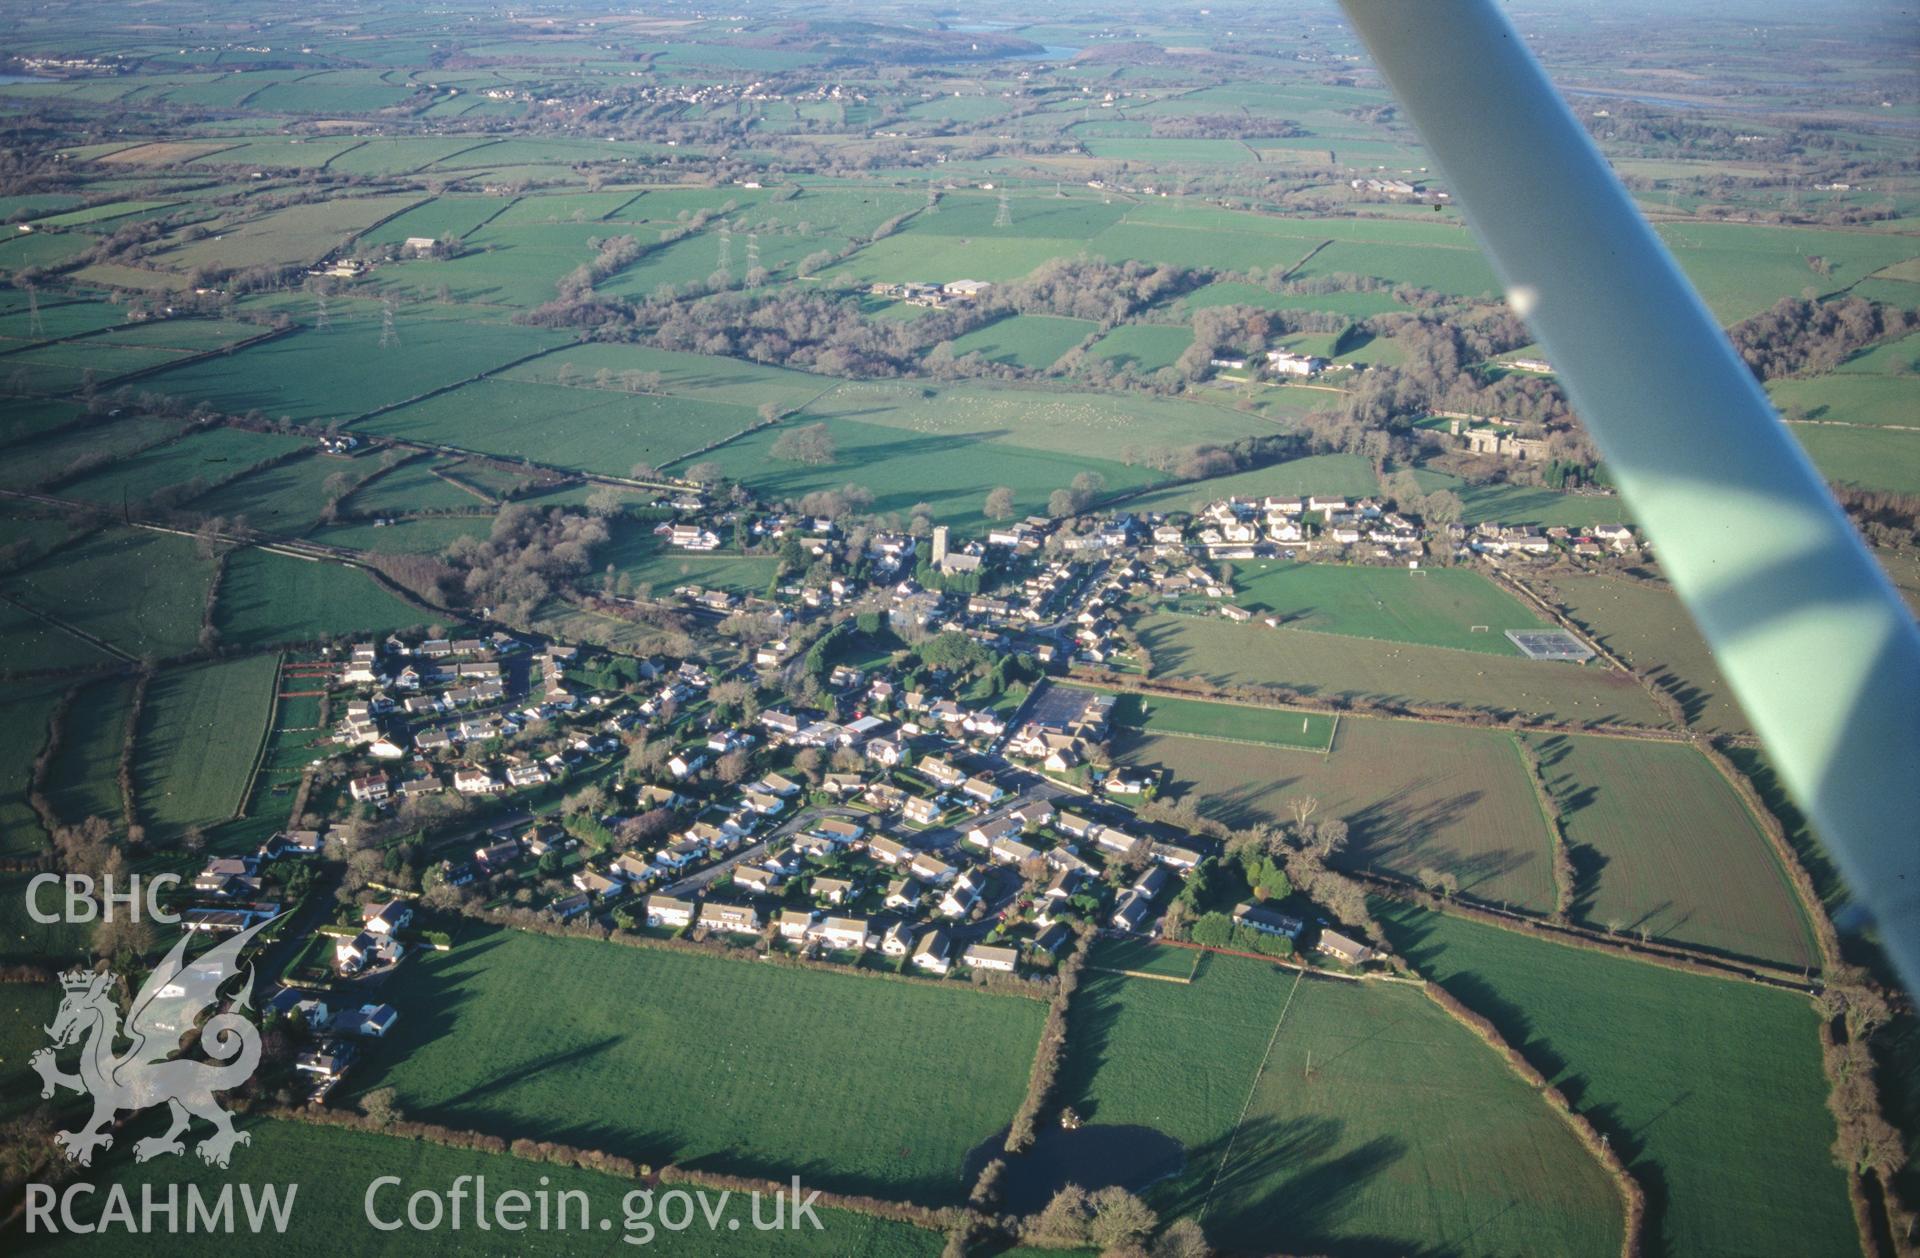 Slide of RCAHMW colour oblique aerial photograph of Lamphey, taken by T.G. Driver, 3/12/1997.